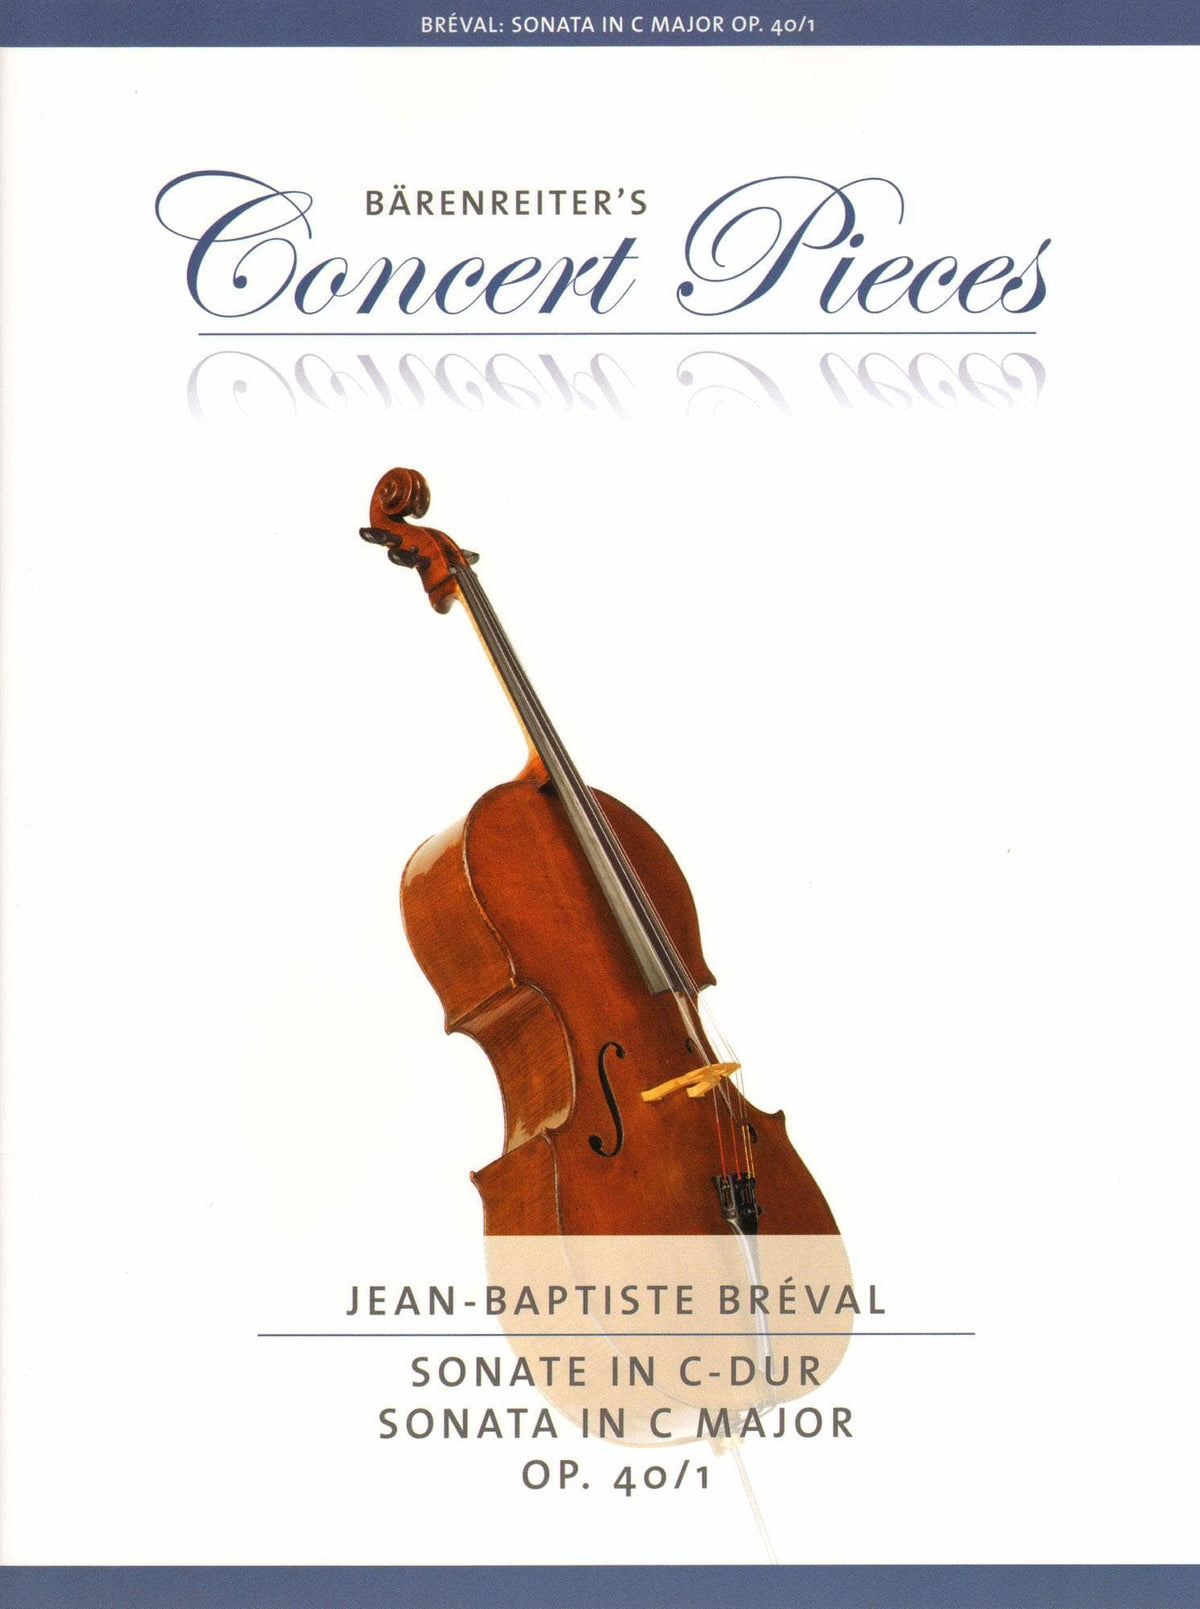 Breval, Jean Baptiste - Sonata in C Major Op 40 - for Cello and Piano - edited by Christoph Sassmannshaus - Barenreiter's Concert Pieces